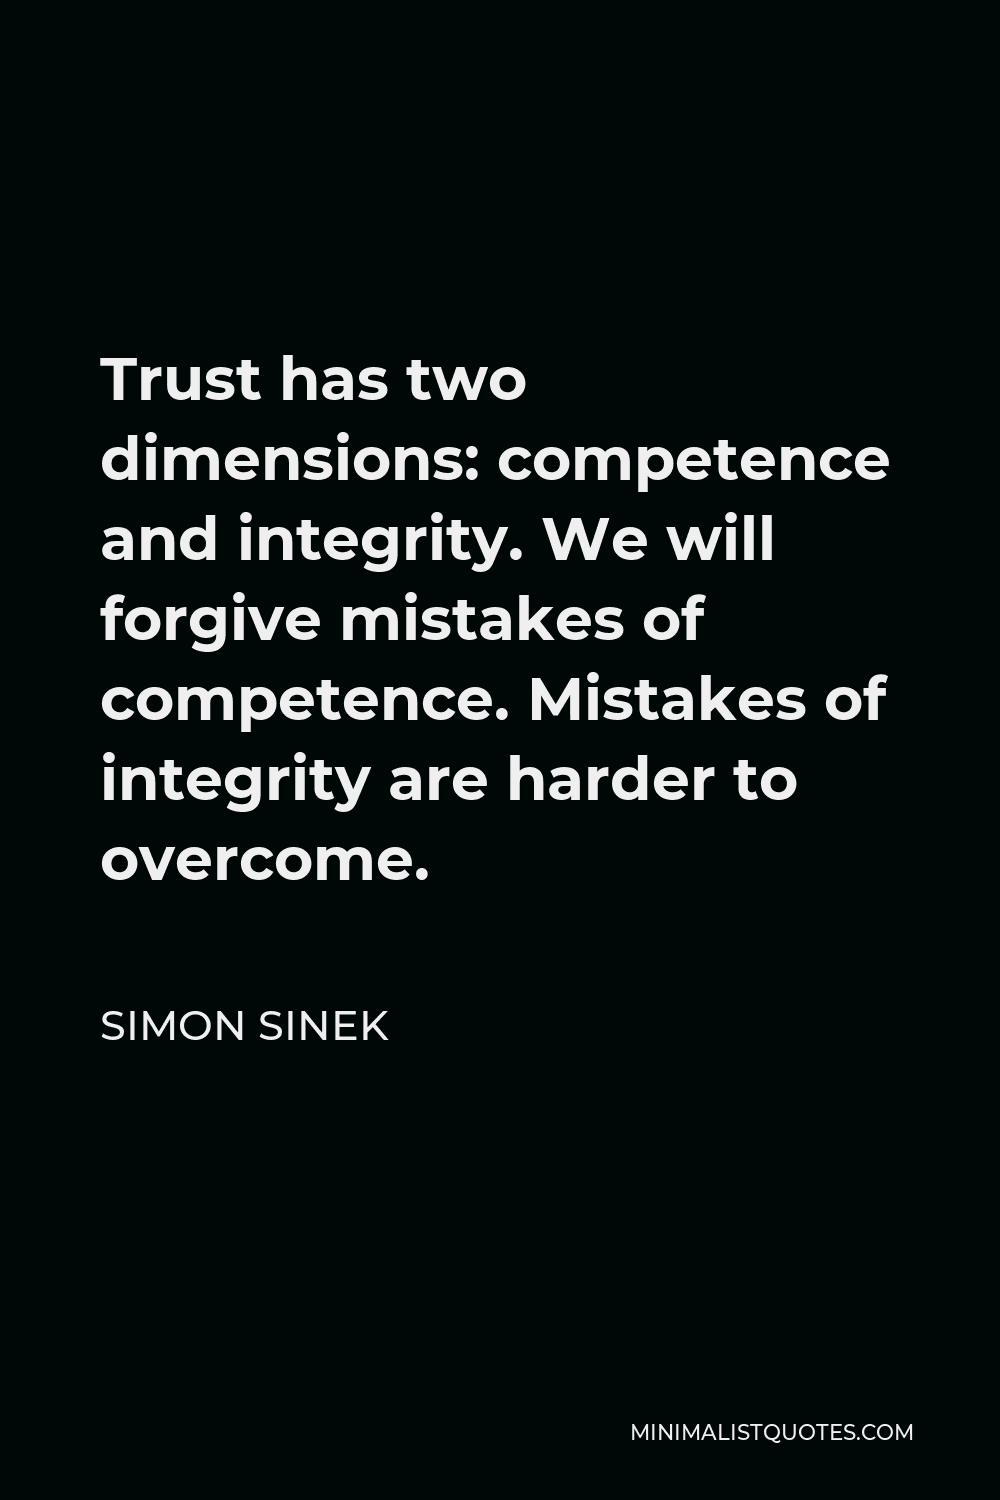 Simon Sinek Quote - Trust has two dimensions: competence and integrity. We will forgive mistakes of competence. Mistakes of integrity are harder to overcome.